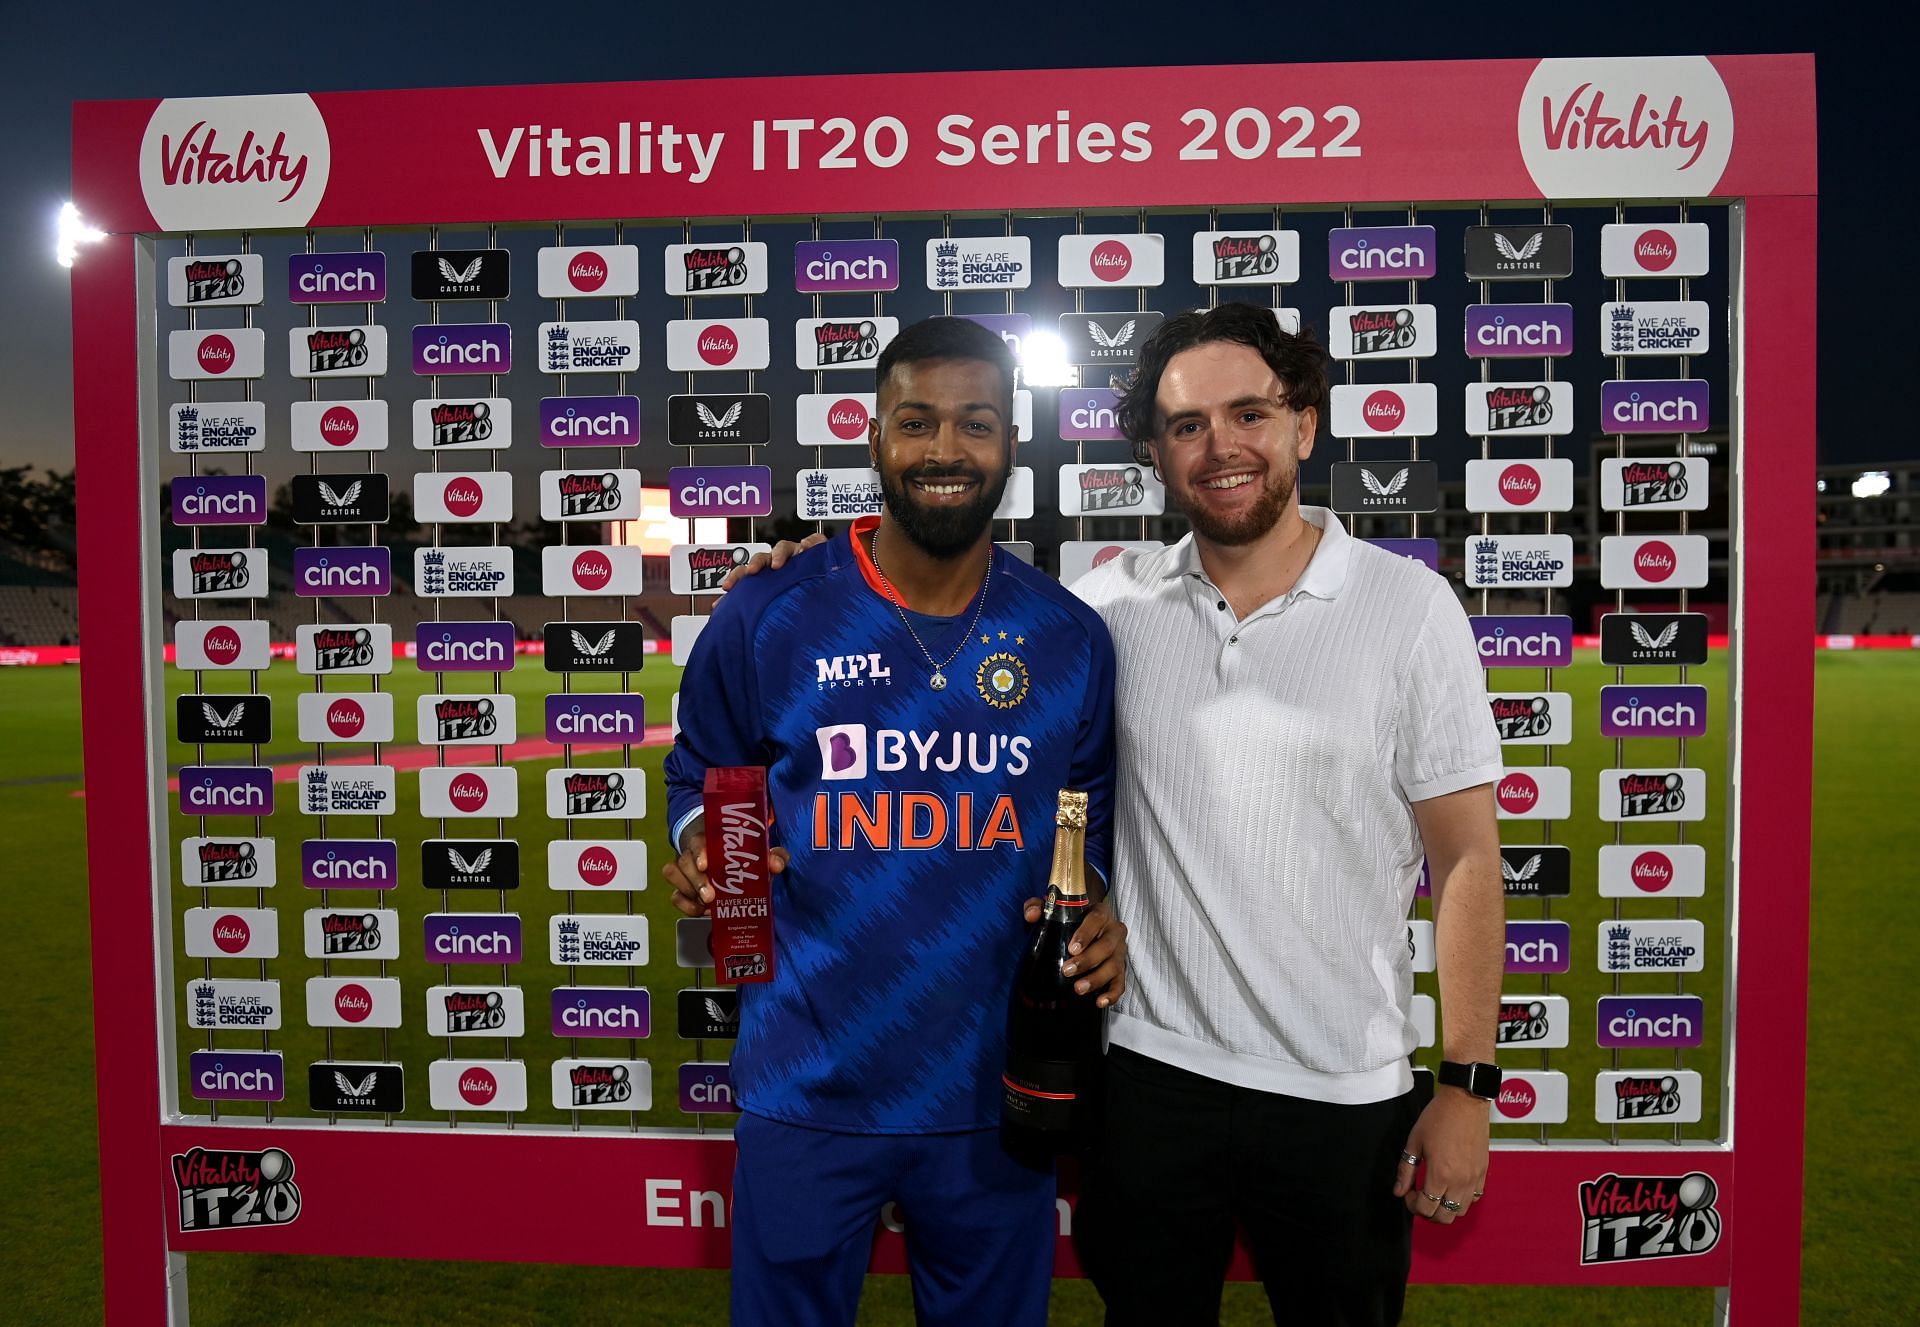 Hardik Pandya won the Man of the Match award in the first T20I of the series against England